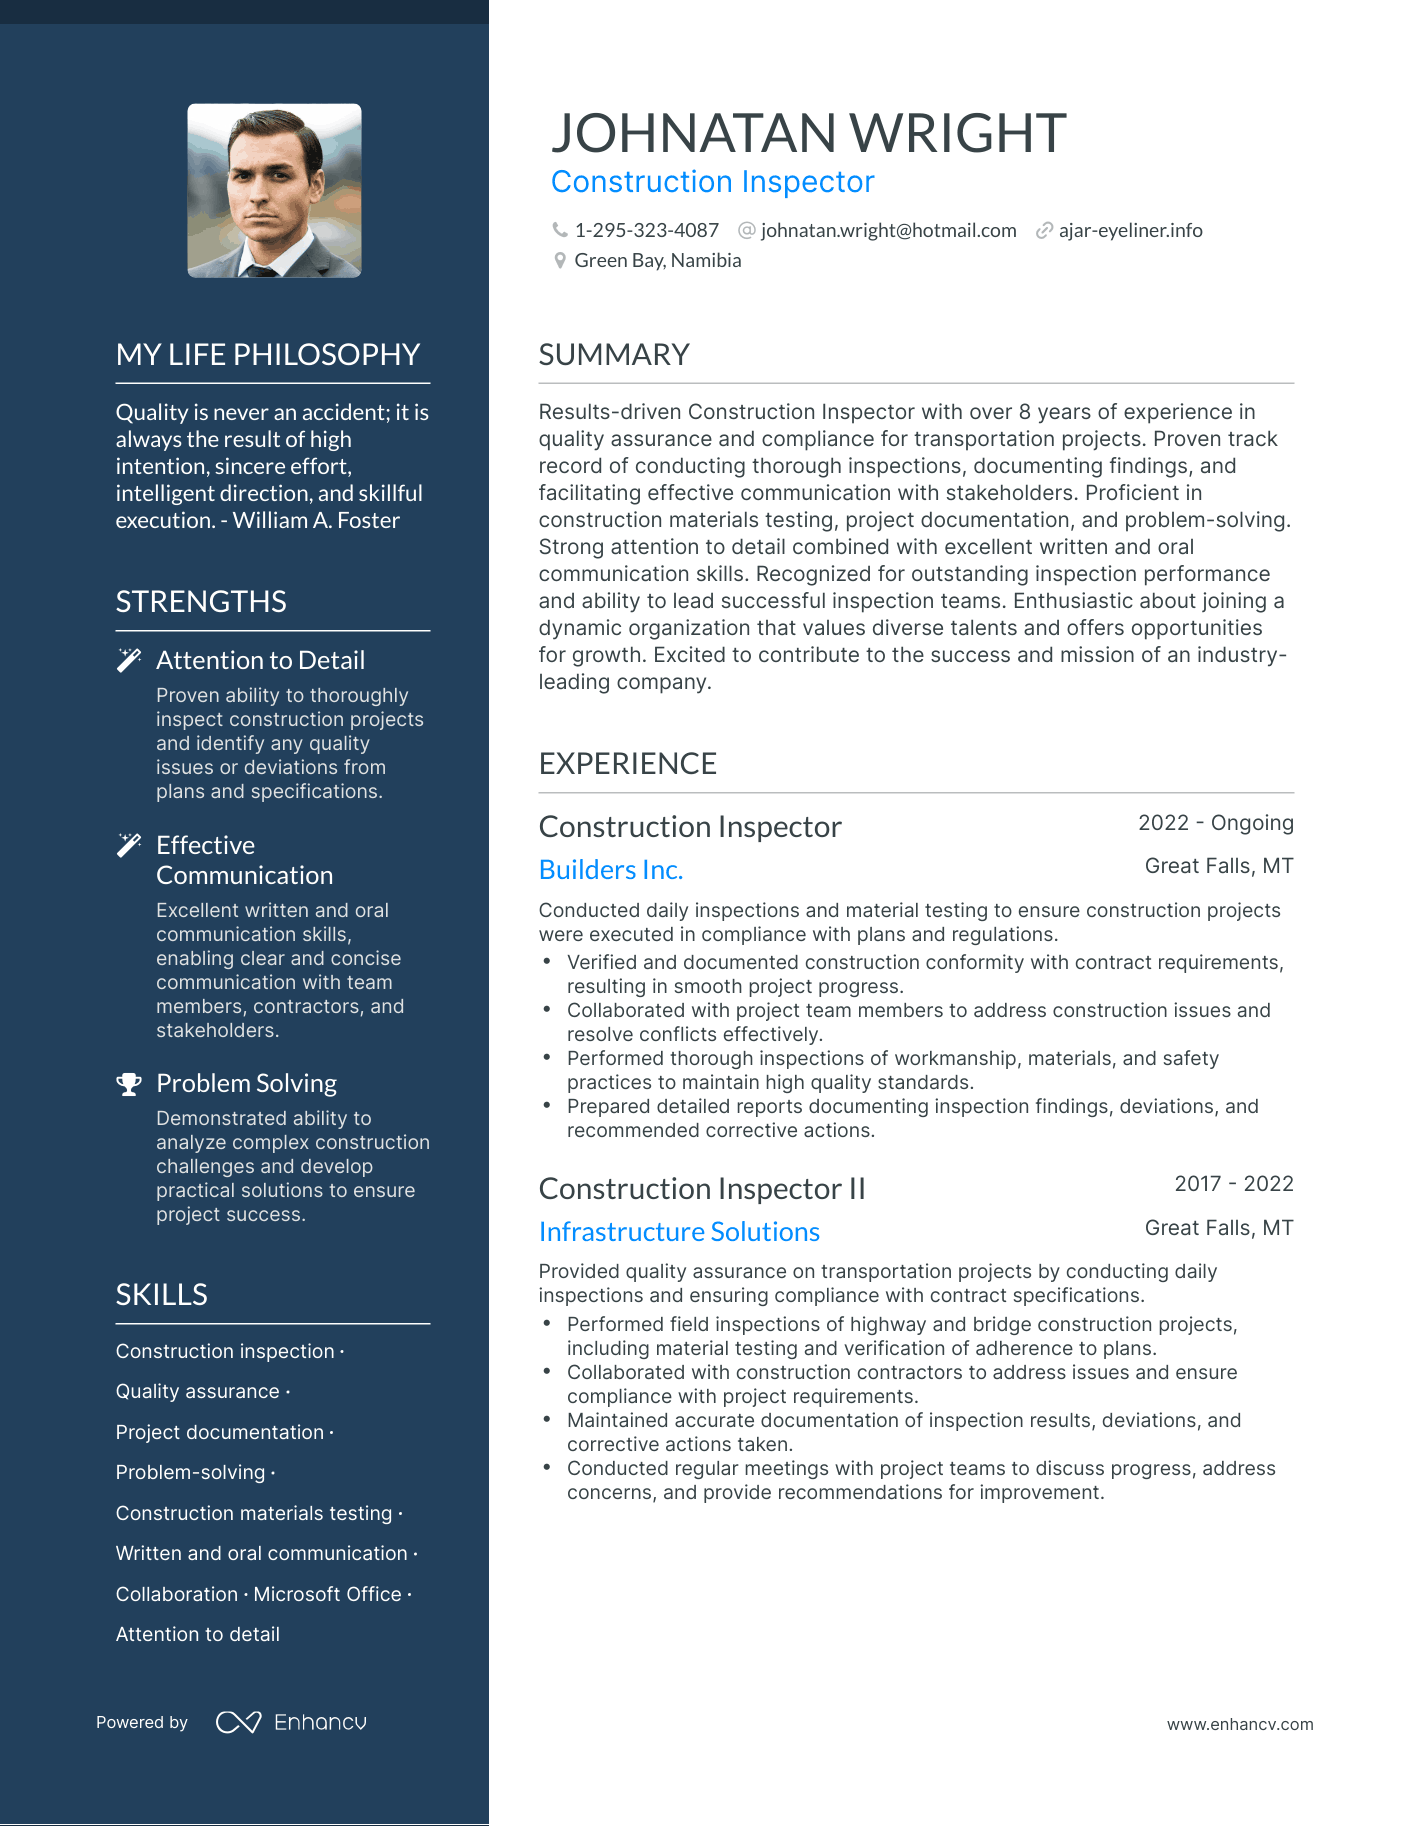 Construction Inspector resume example